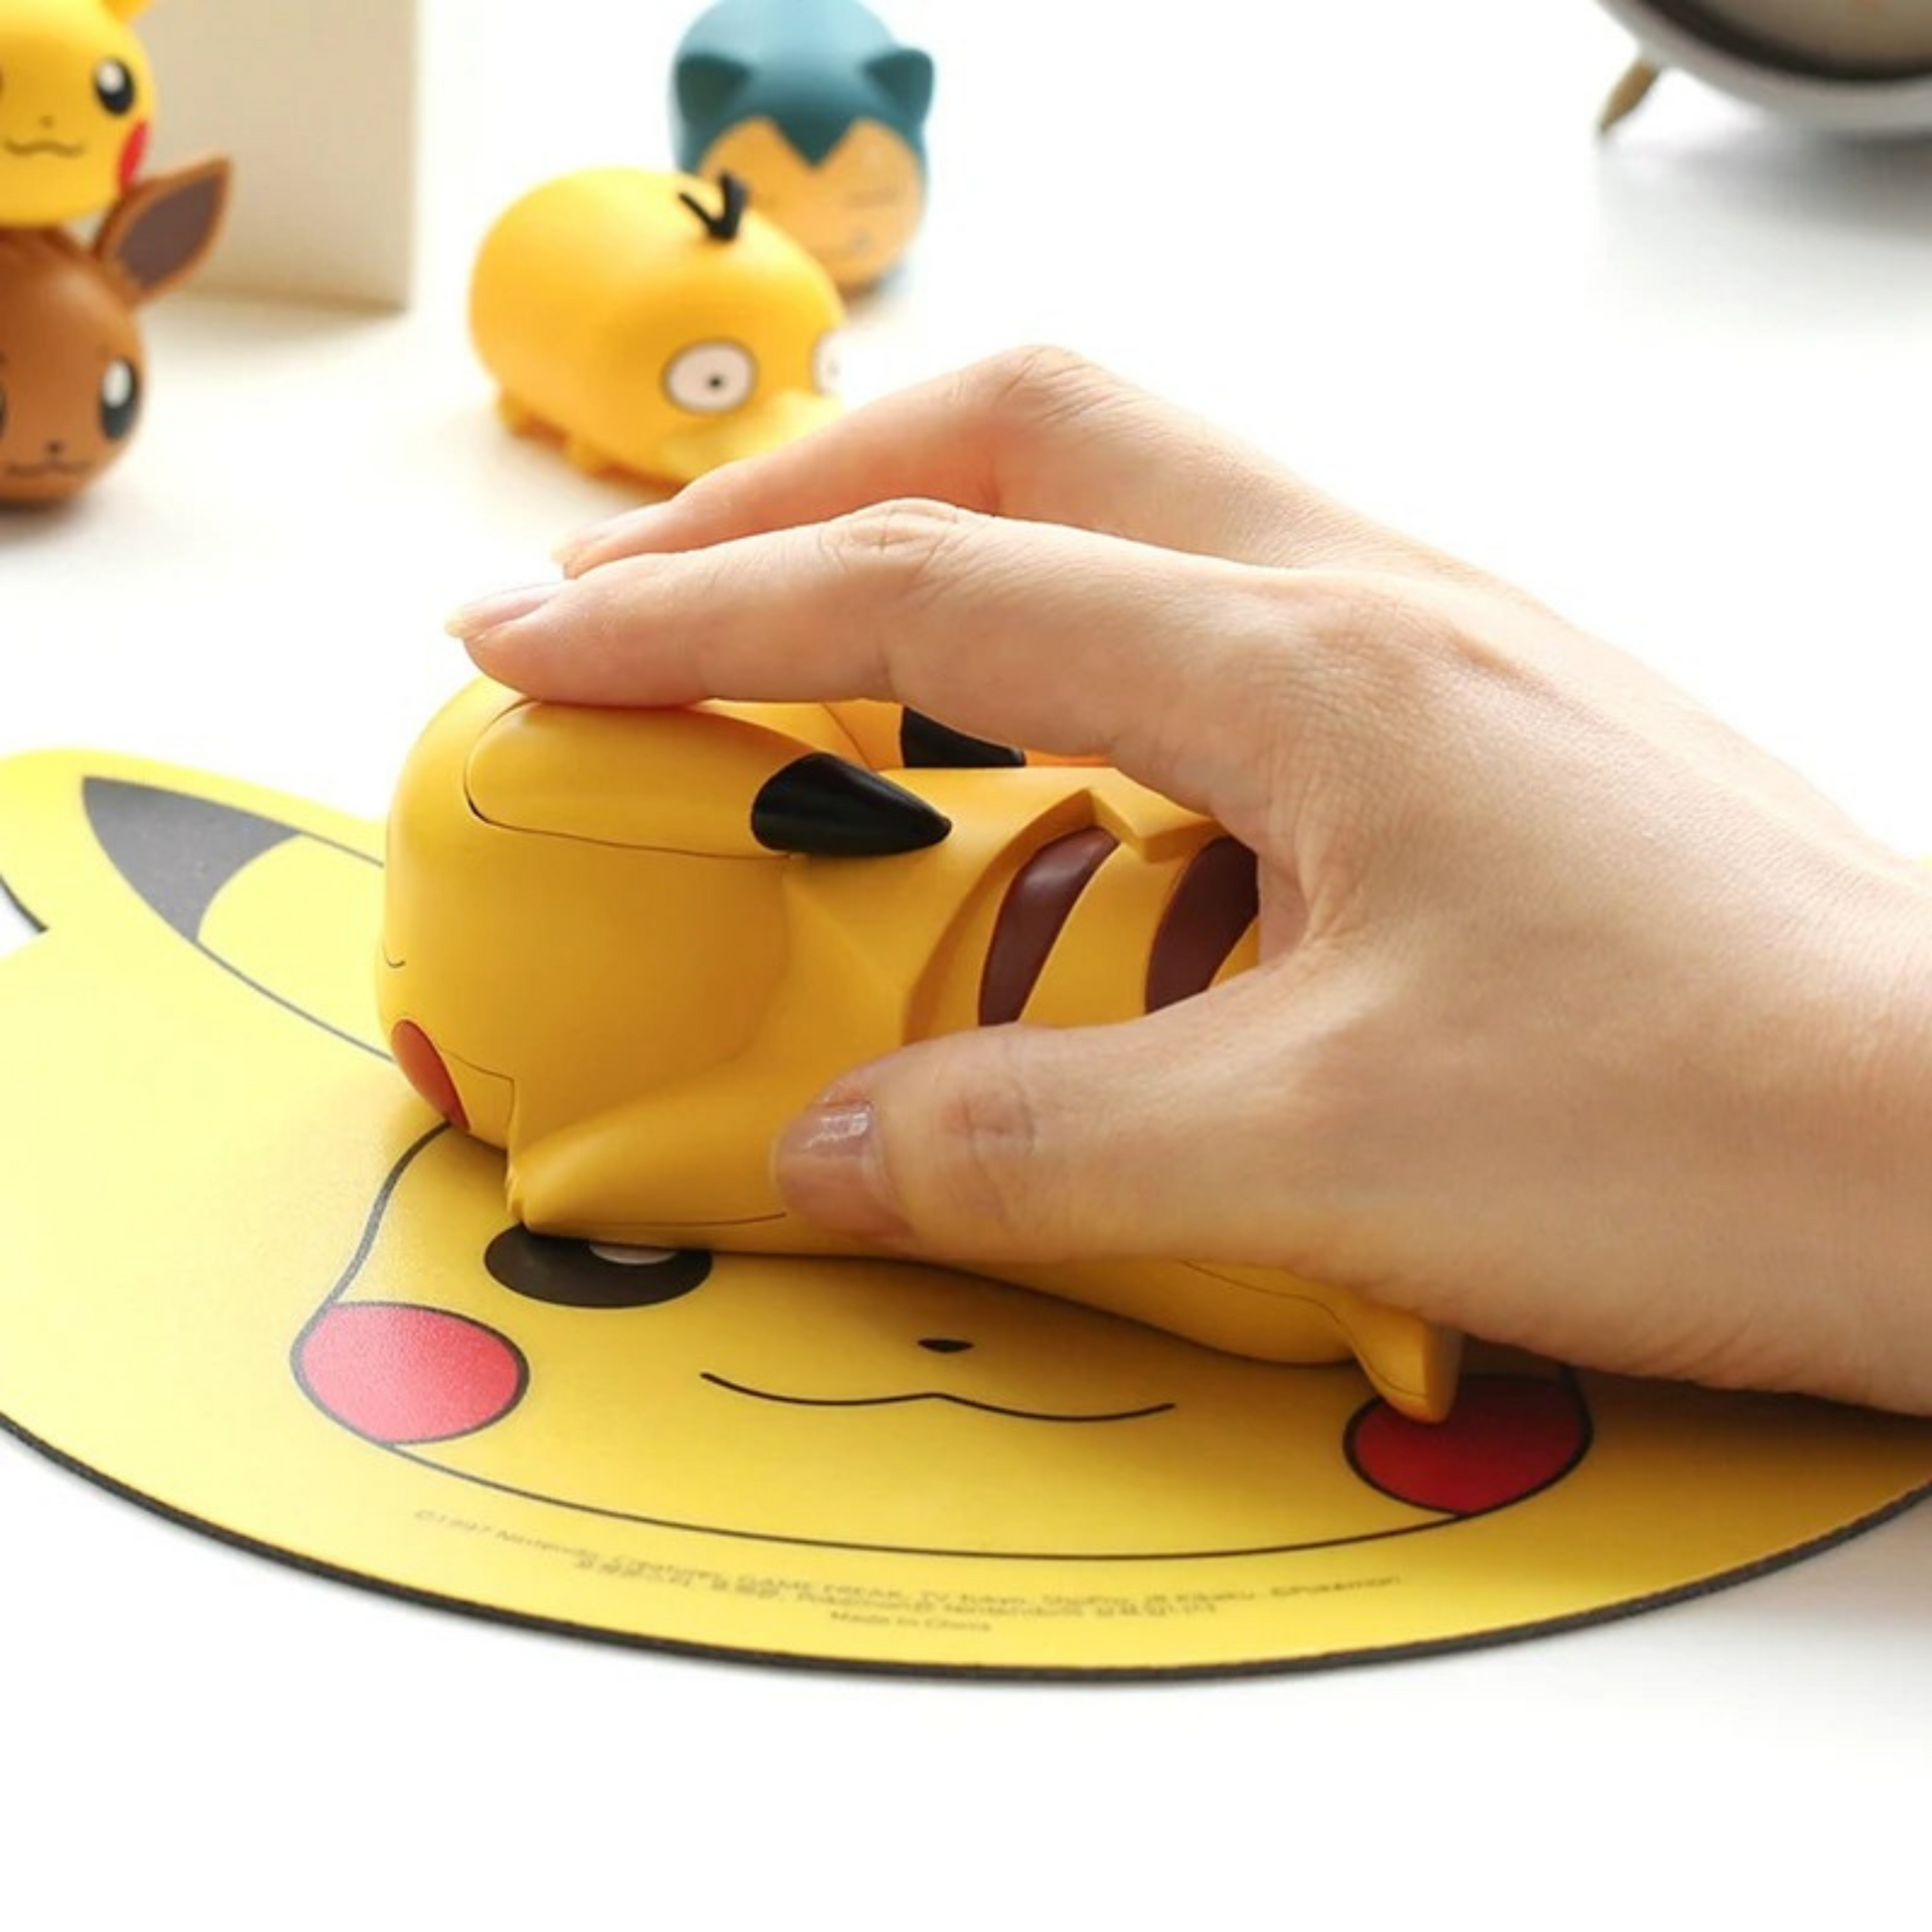 Ergonomic - Pikachu Pokémon mouse wireless bluetooth connection with official premium nintendo quality, perfect gift for pokemon fans